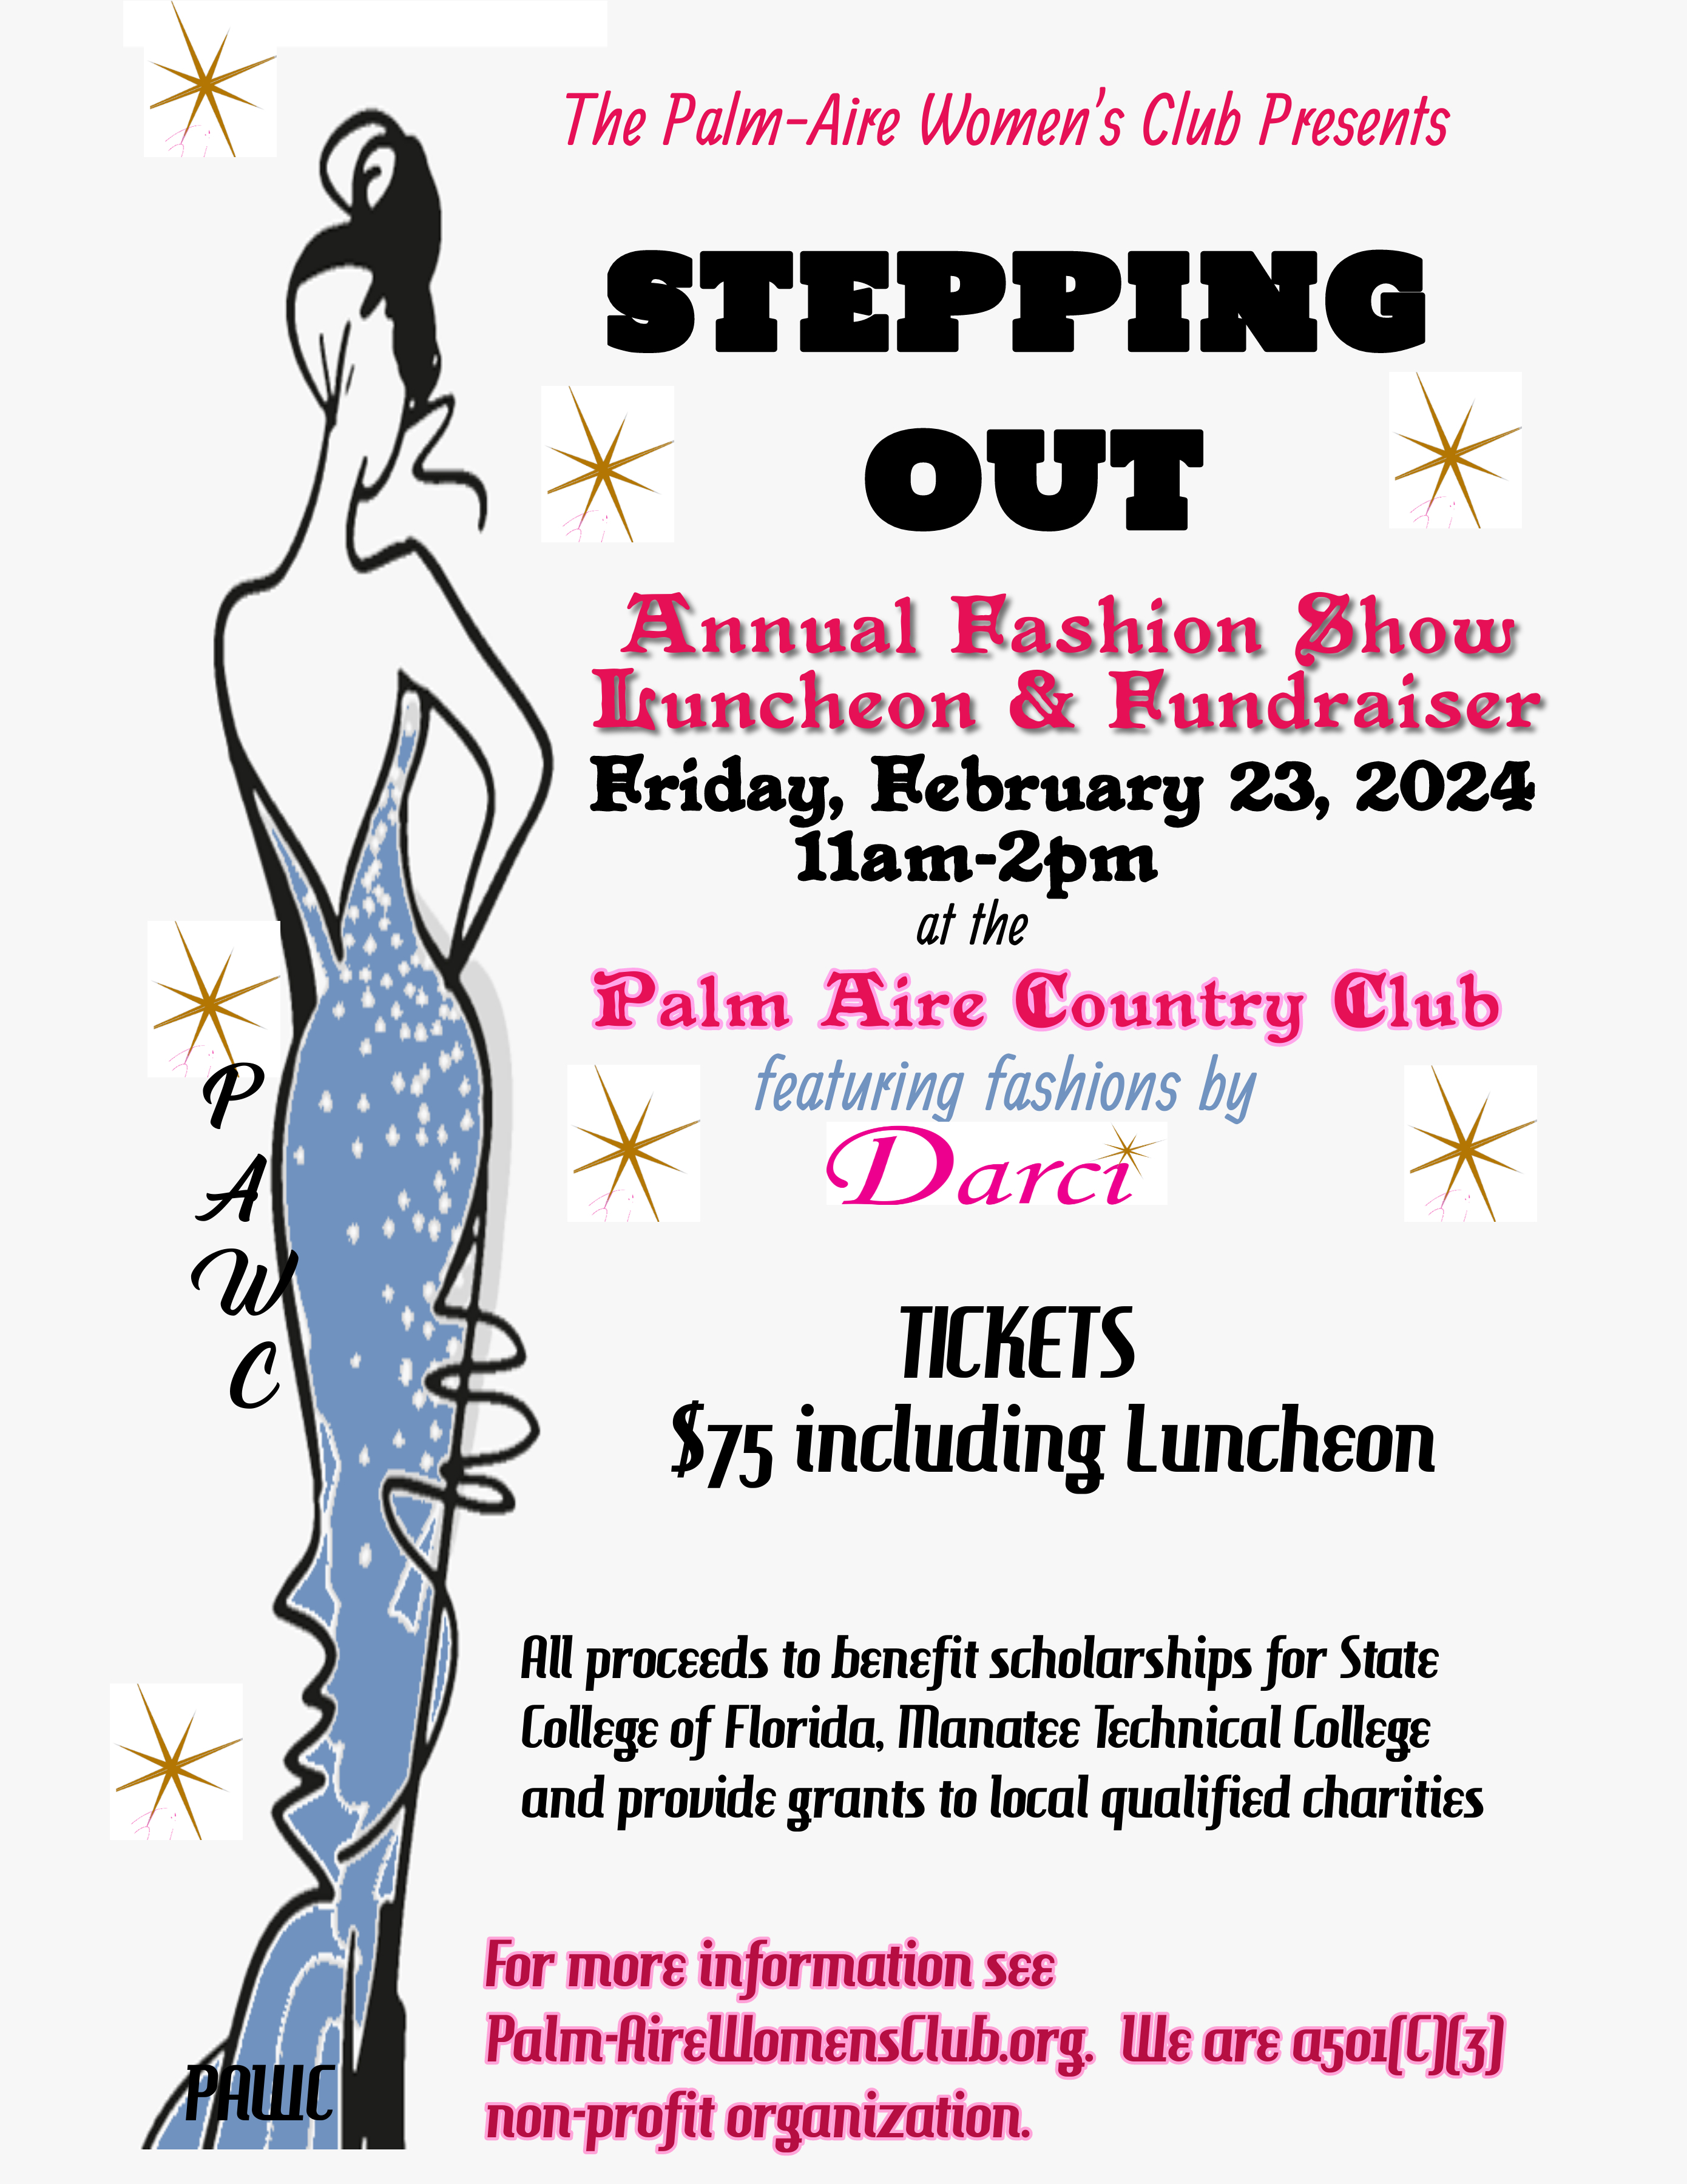 STEPPING OUT the PAWC Fashion Show will take place on Friday, February 23, 2024.